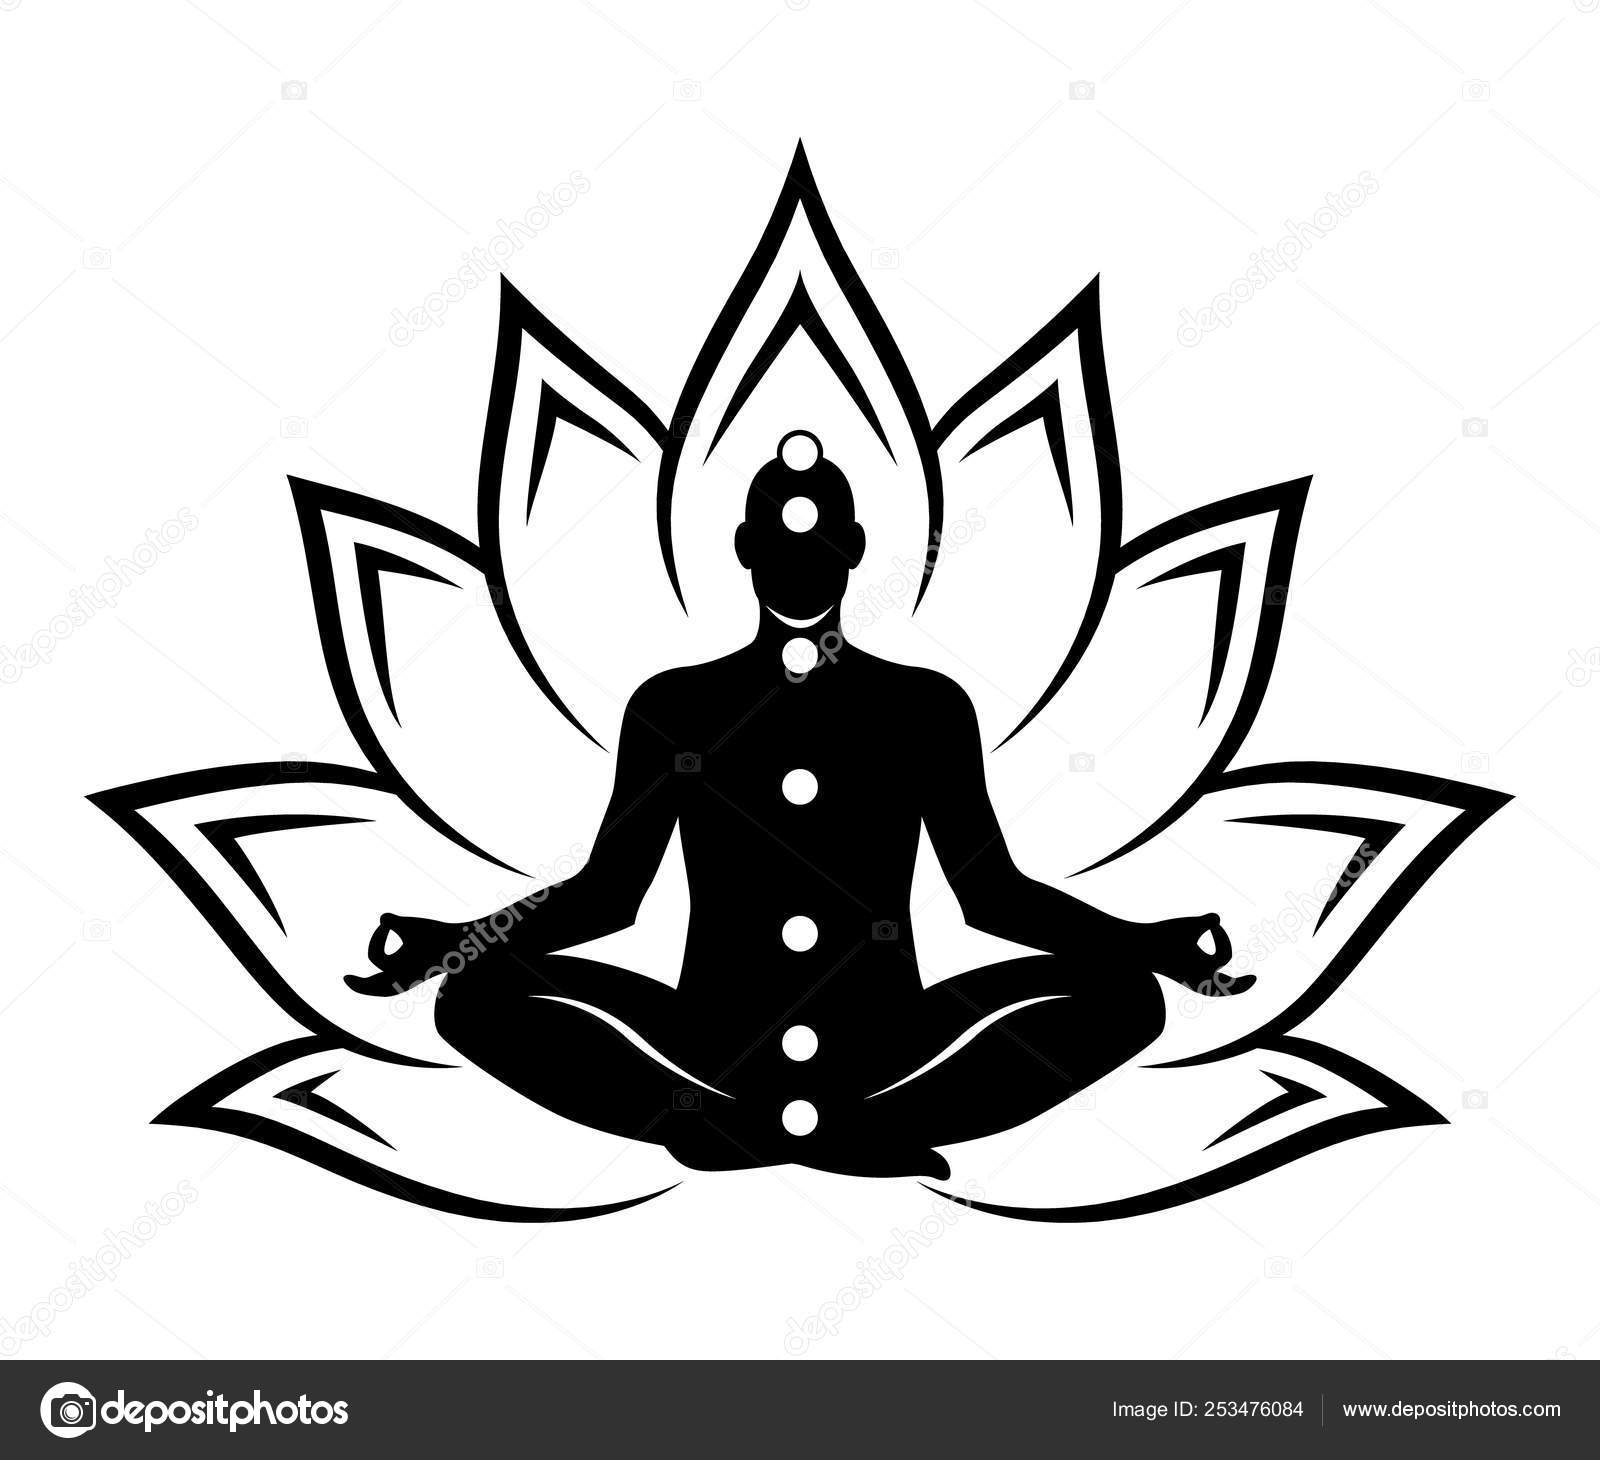 The Root of the Mandrake Sits in the Lotus Pose Stock Vector